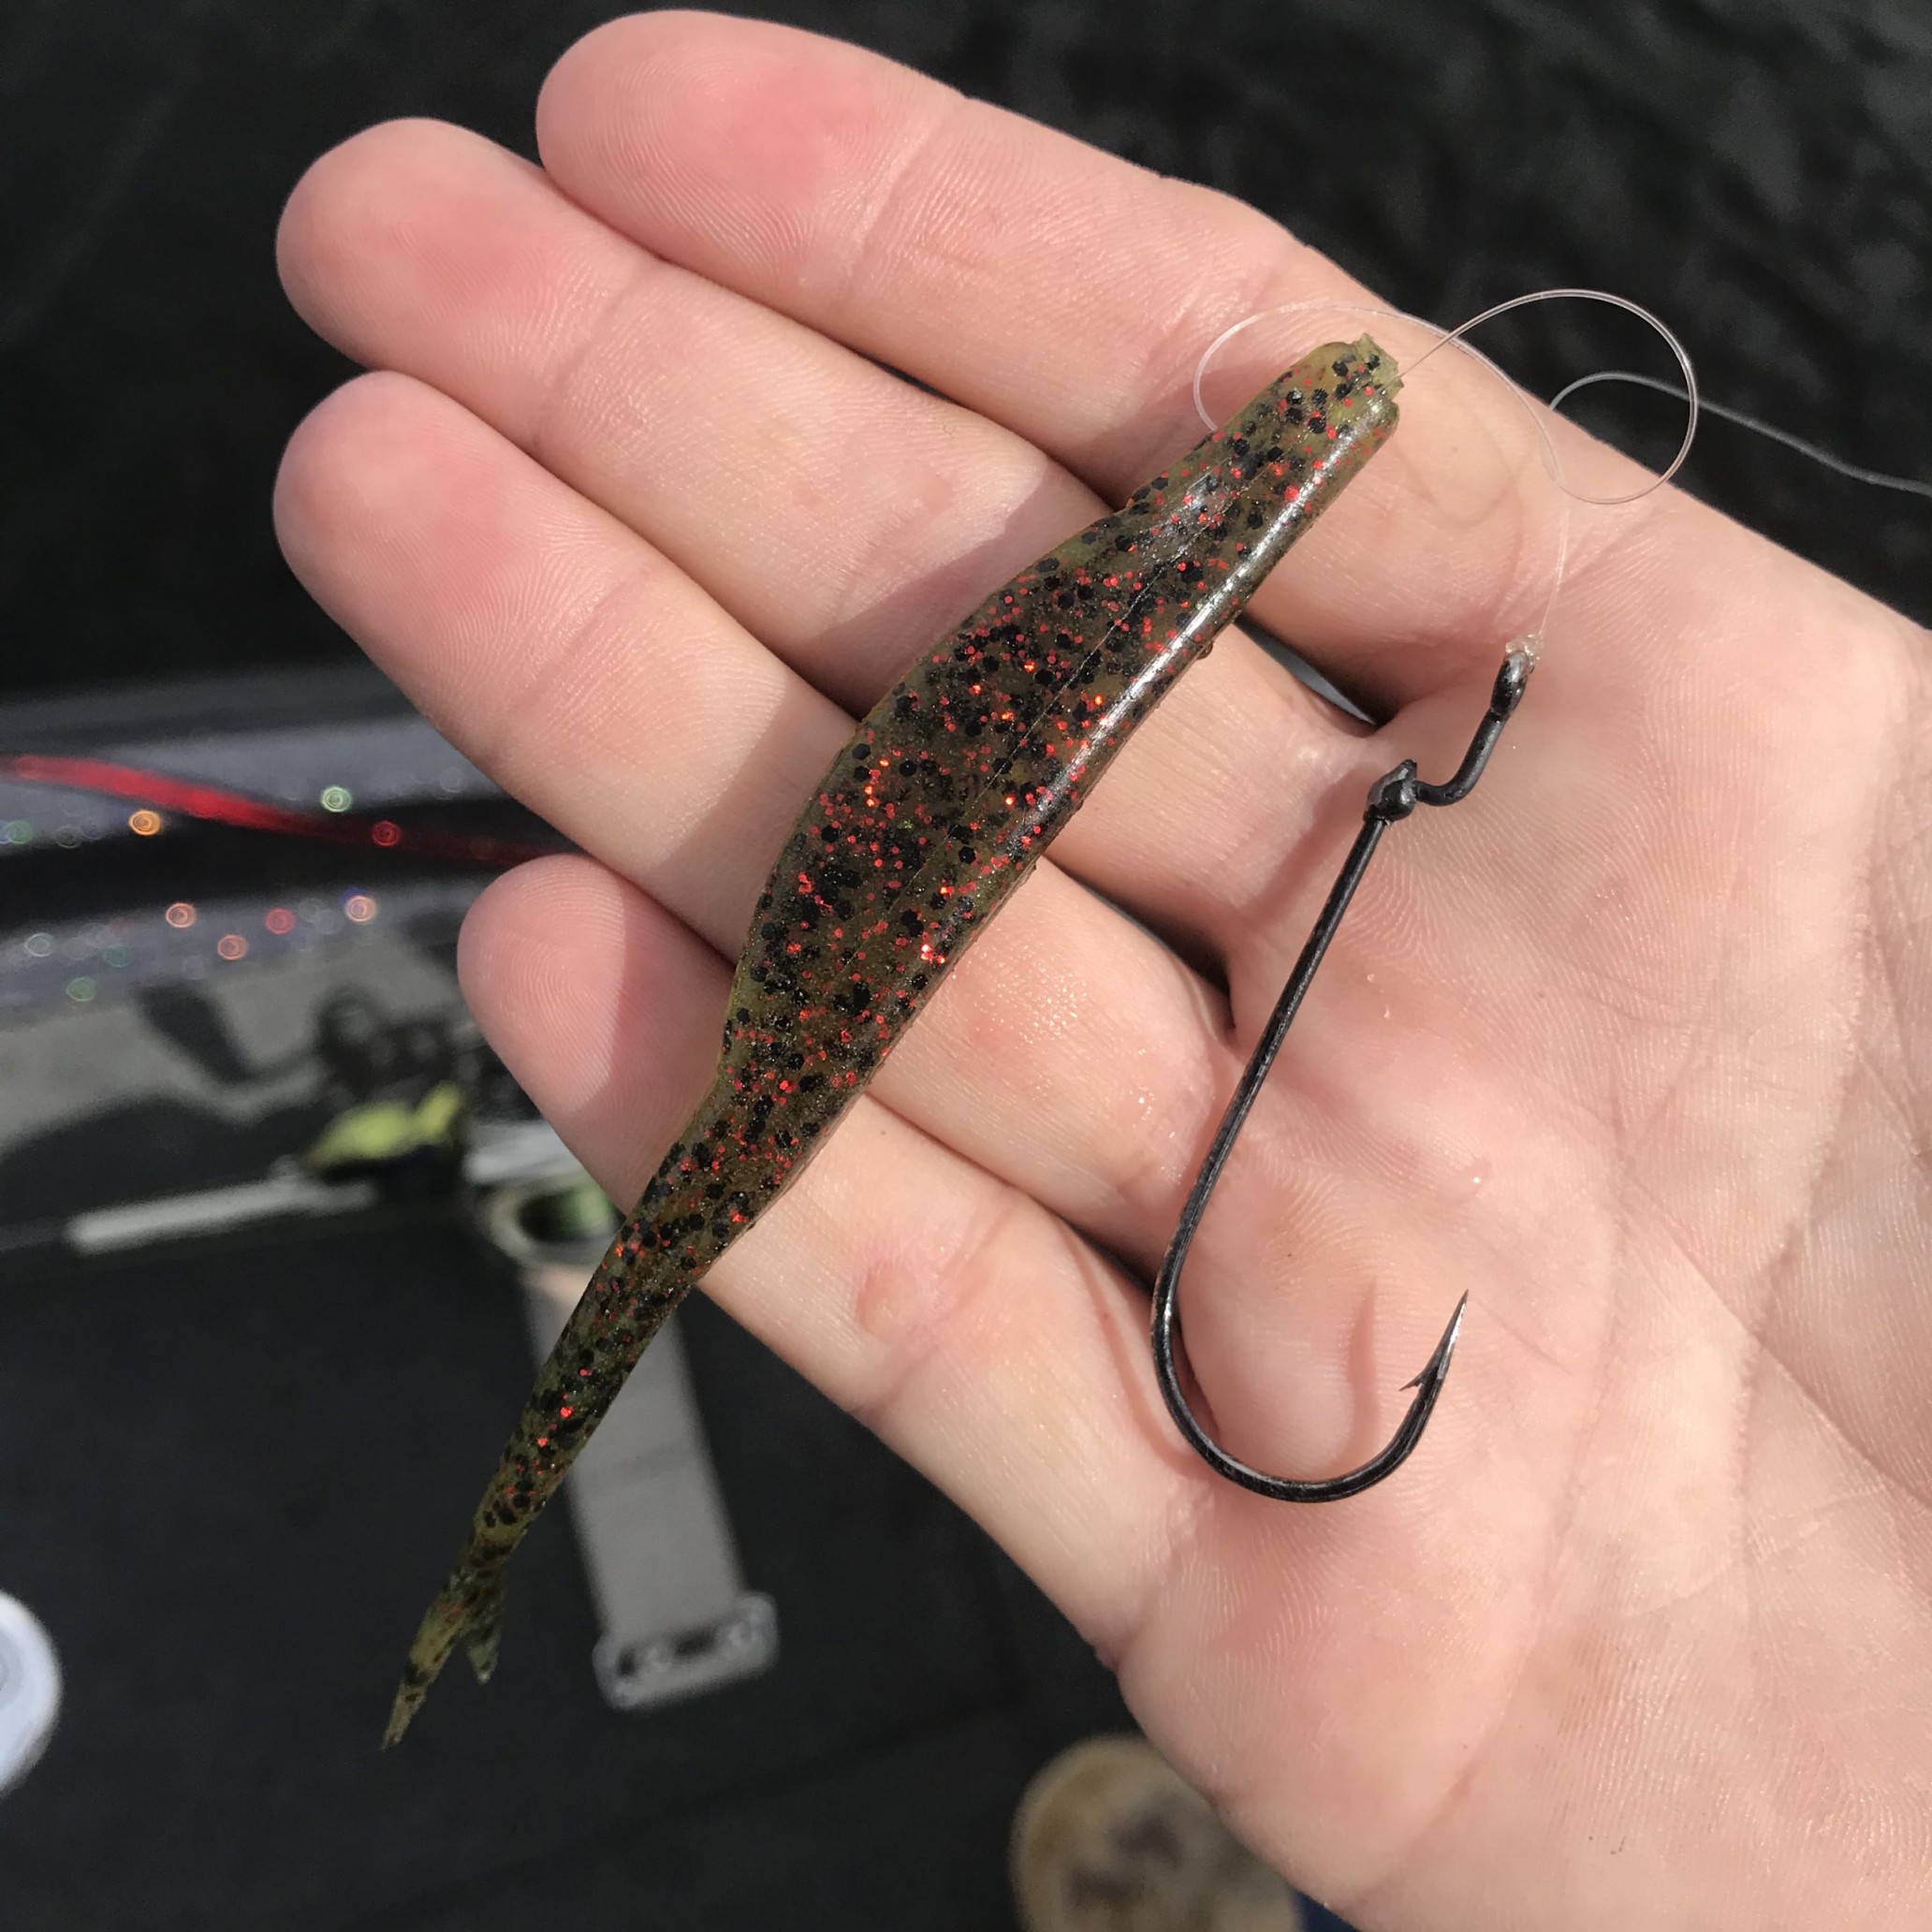 Fishin' Tip Friday – The finer side of the Fluke – Anglers Channel